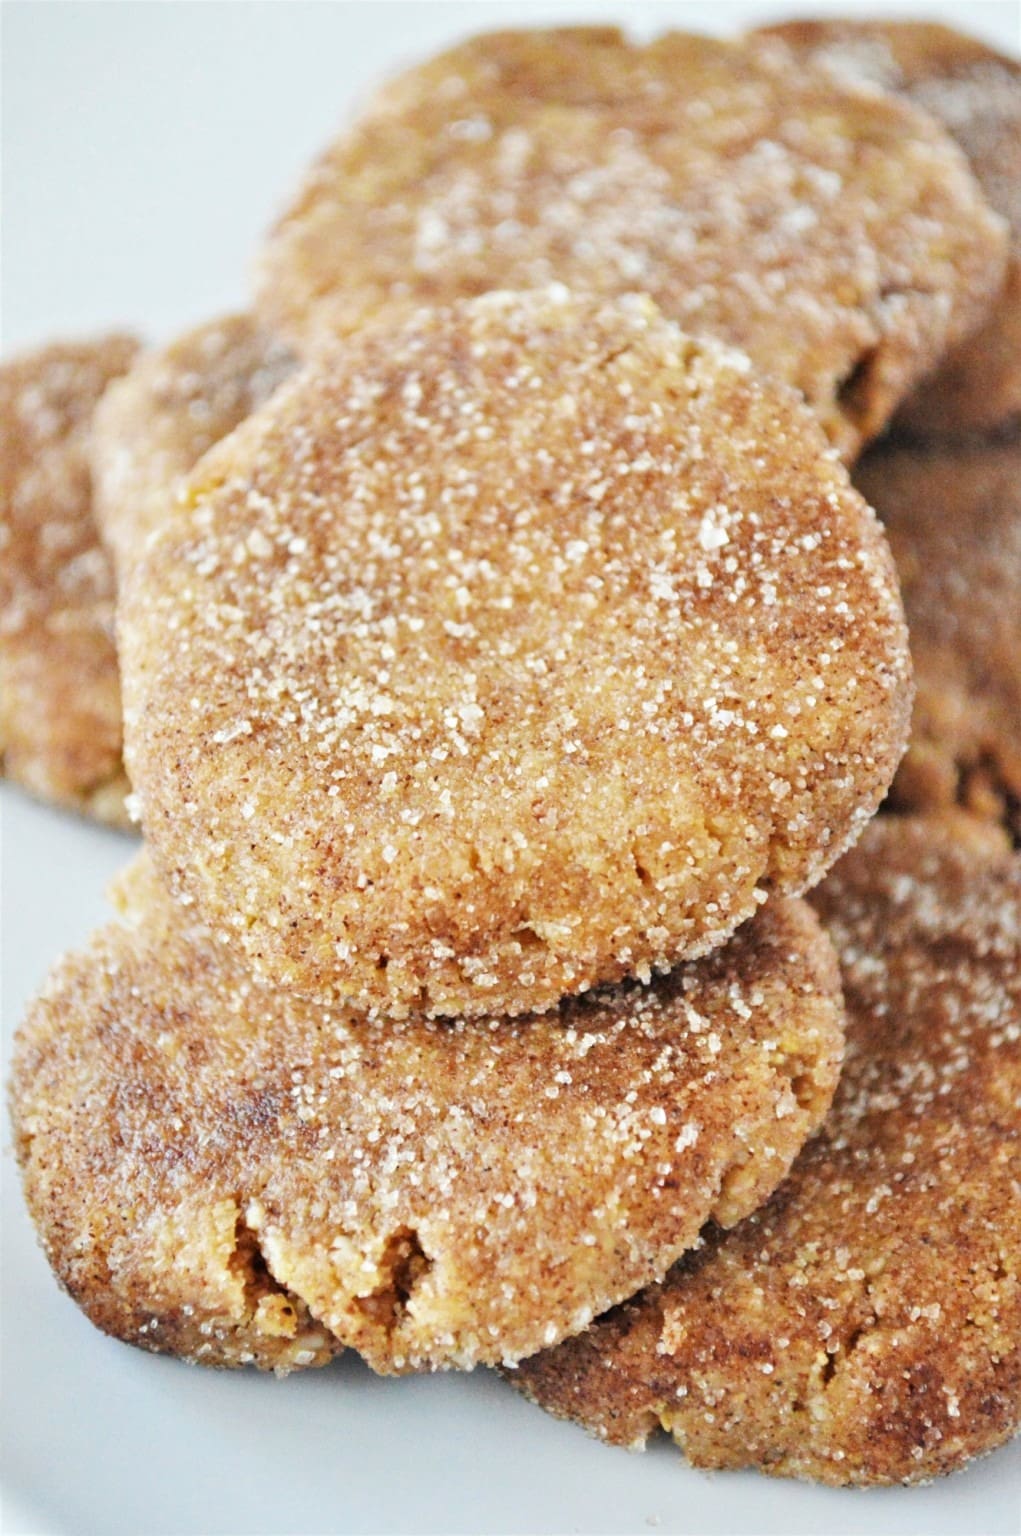 White sugar coated snickerdoodle cookies.